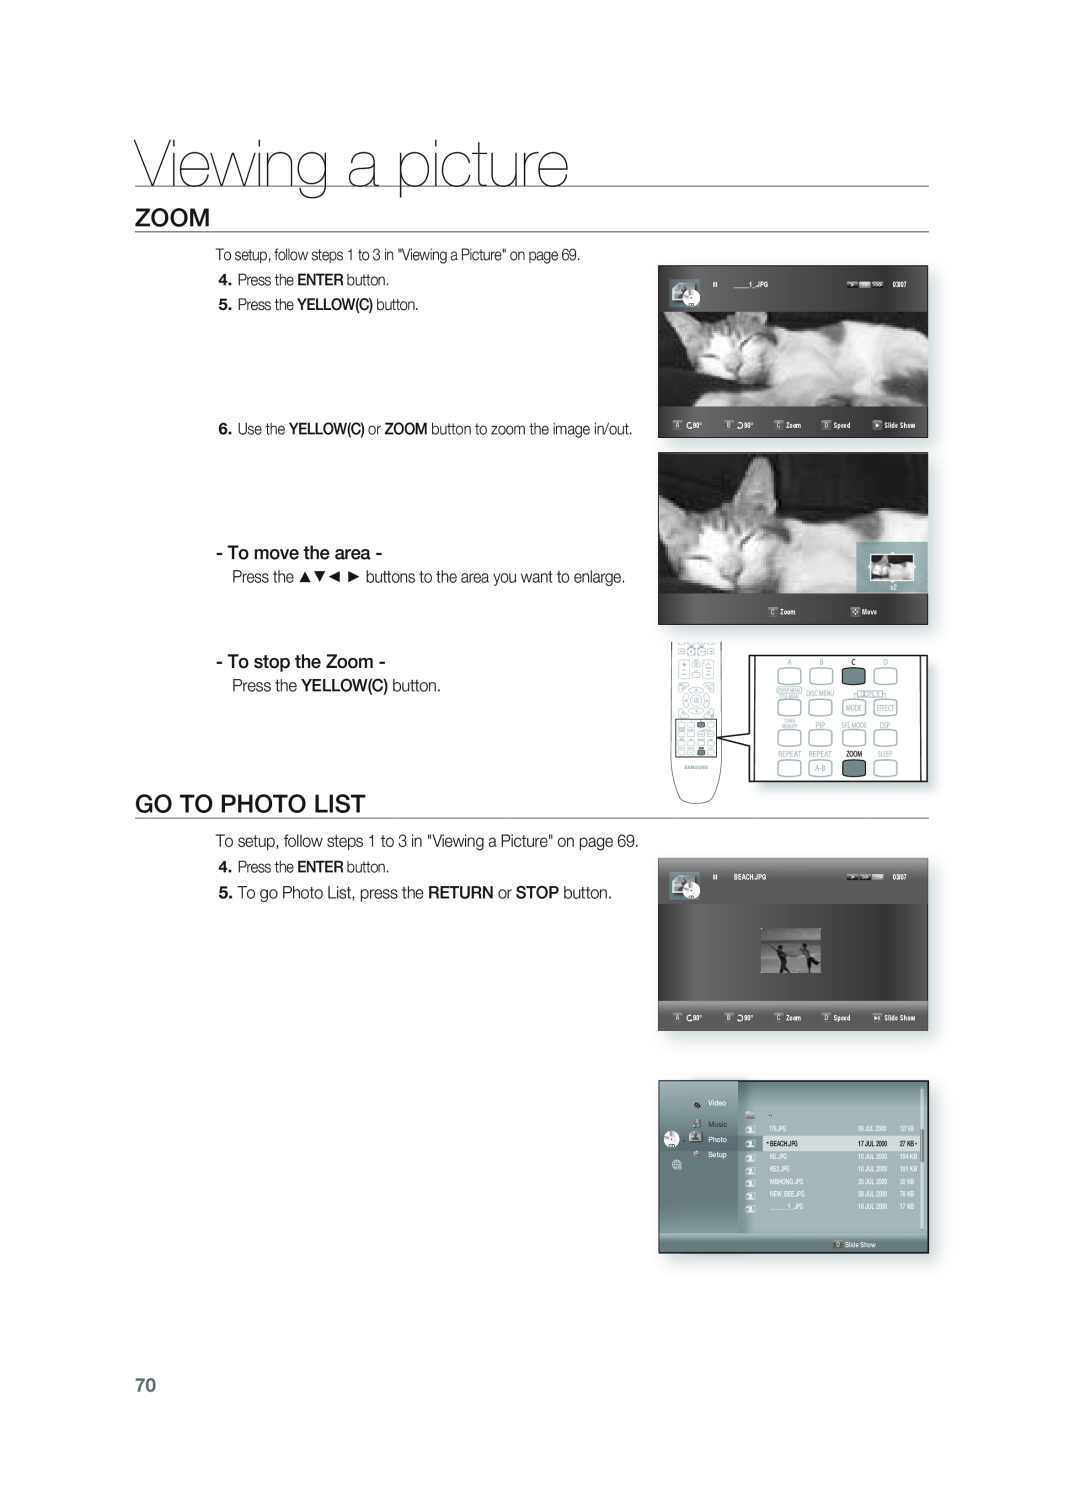 Samsung HT-BD1255, HT-BD1252 user manual Go To Photo List, Viewing a picture, To move the area, To stop the Zoom 